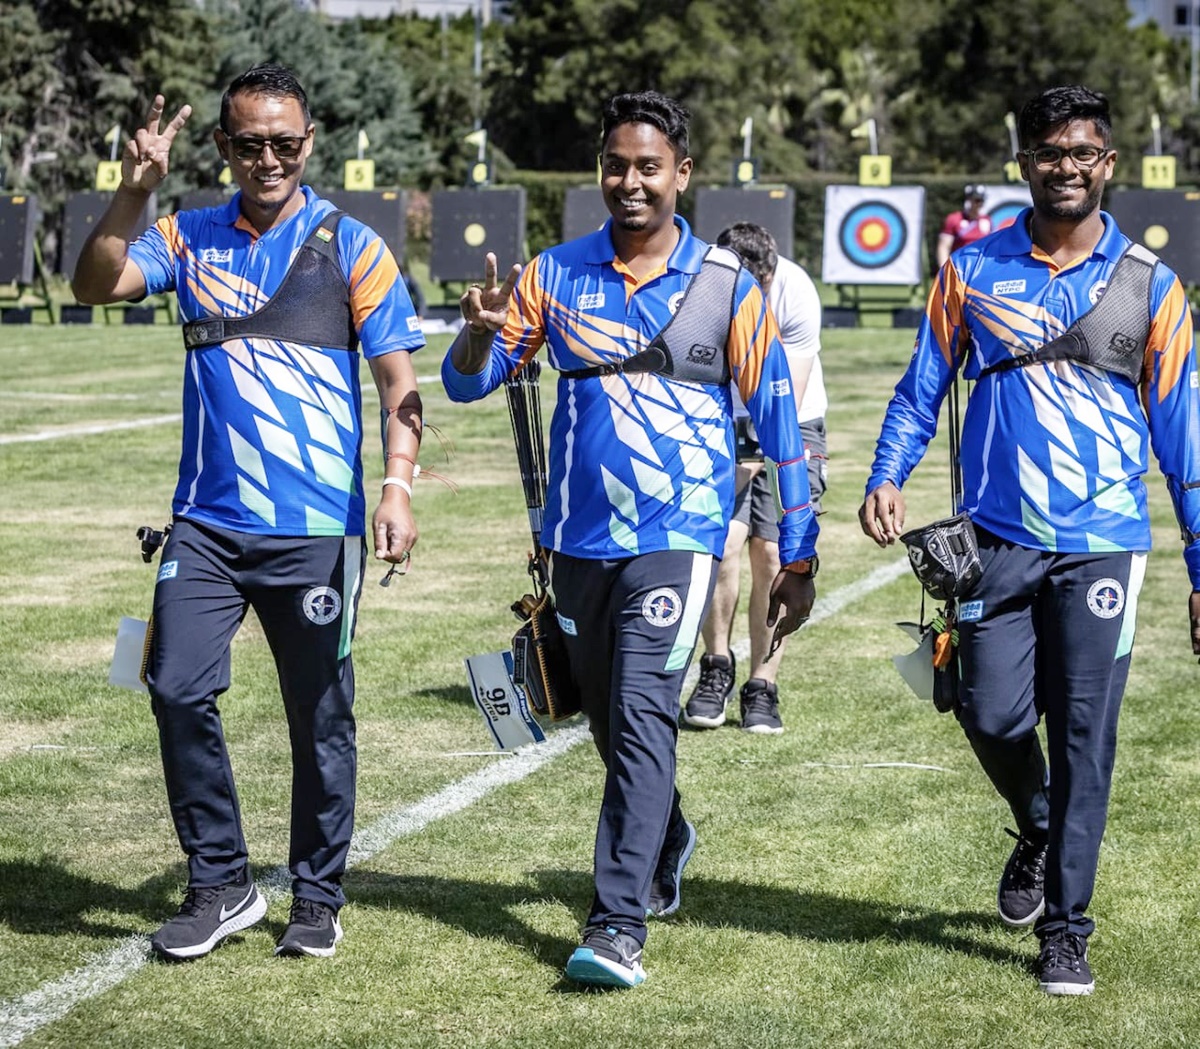 Indian Mens Recurve Team Claim Silver At Archery World Cup Rediff Sports 7758